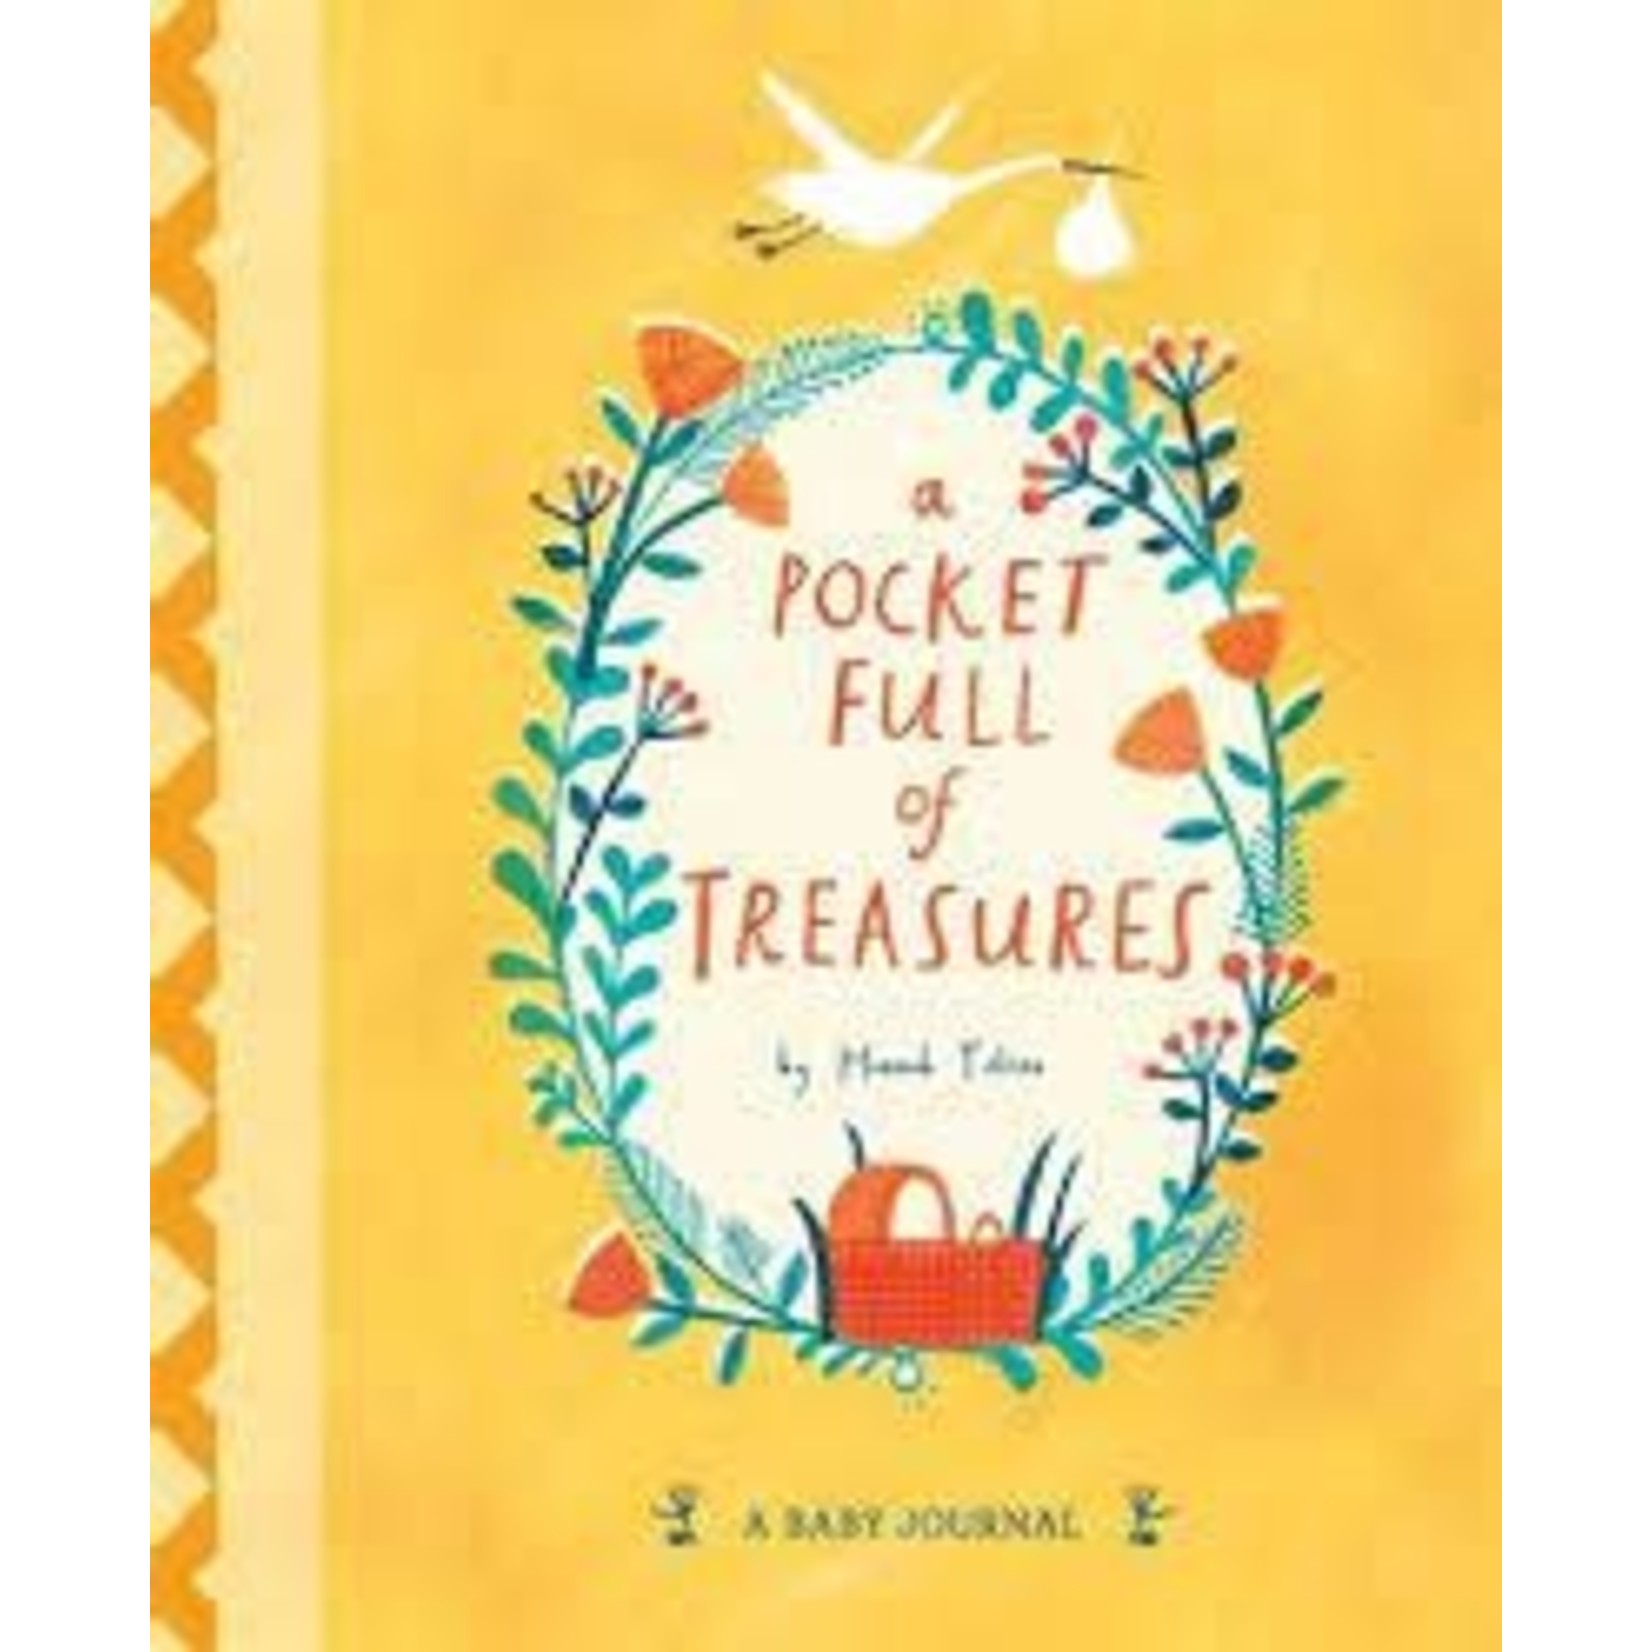 A Pocket Full of Treasures - A Baby Journal